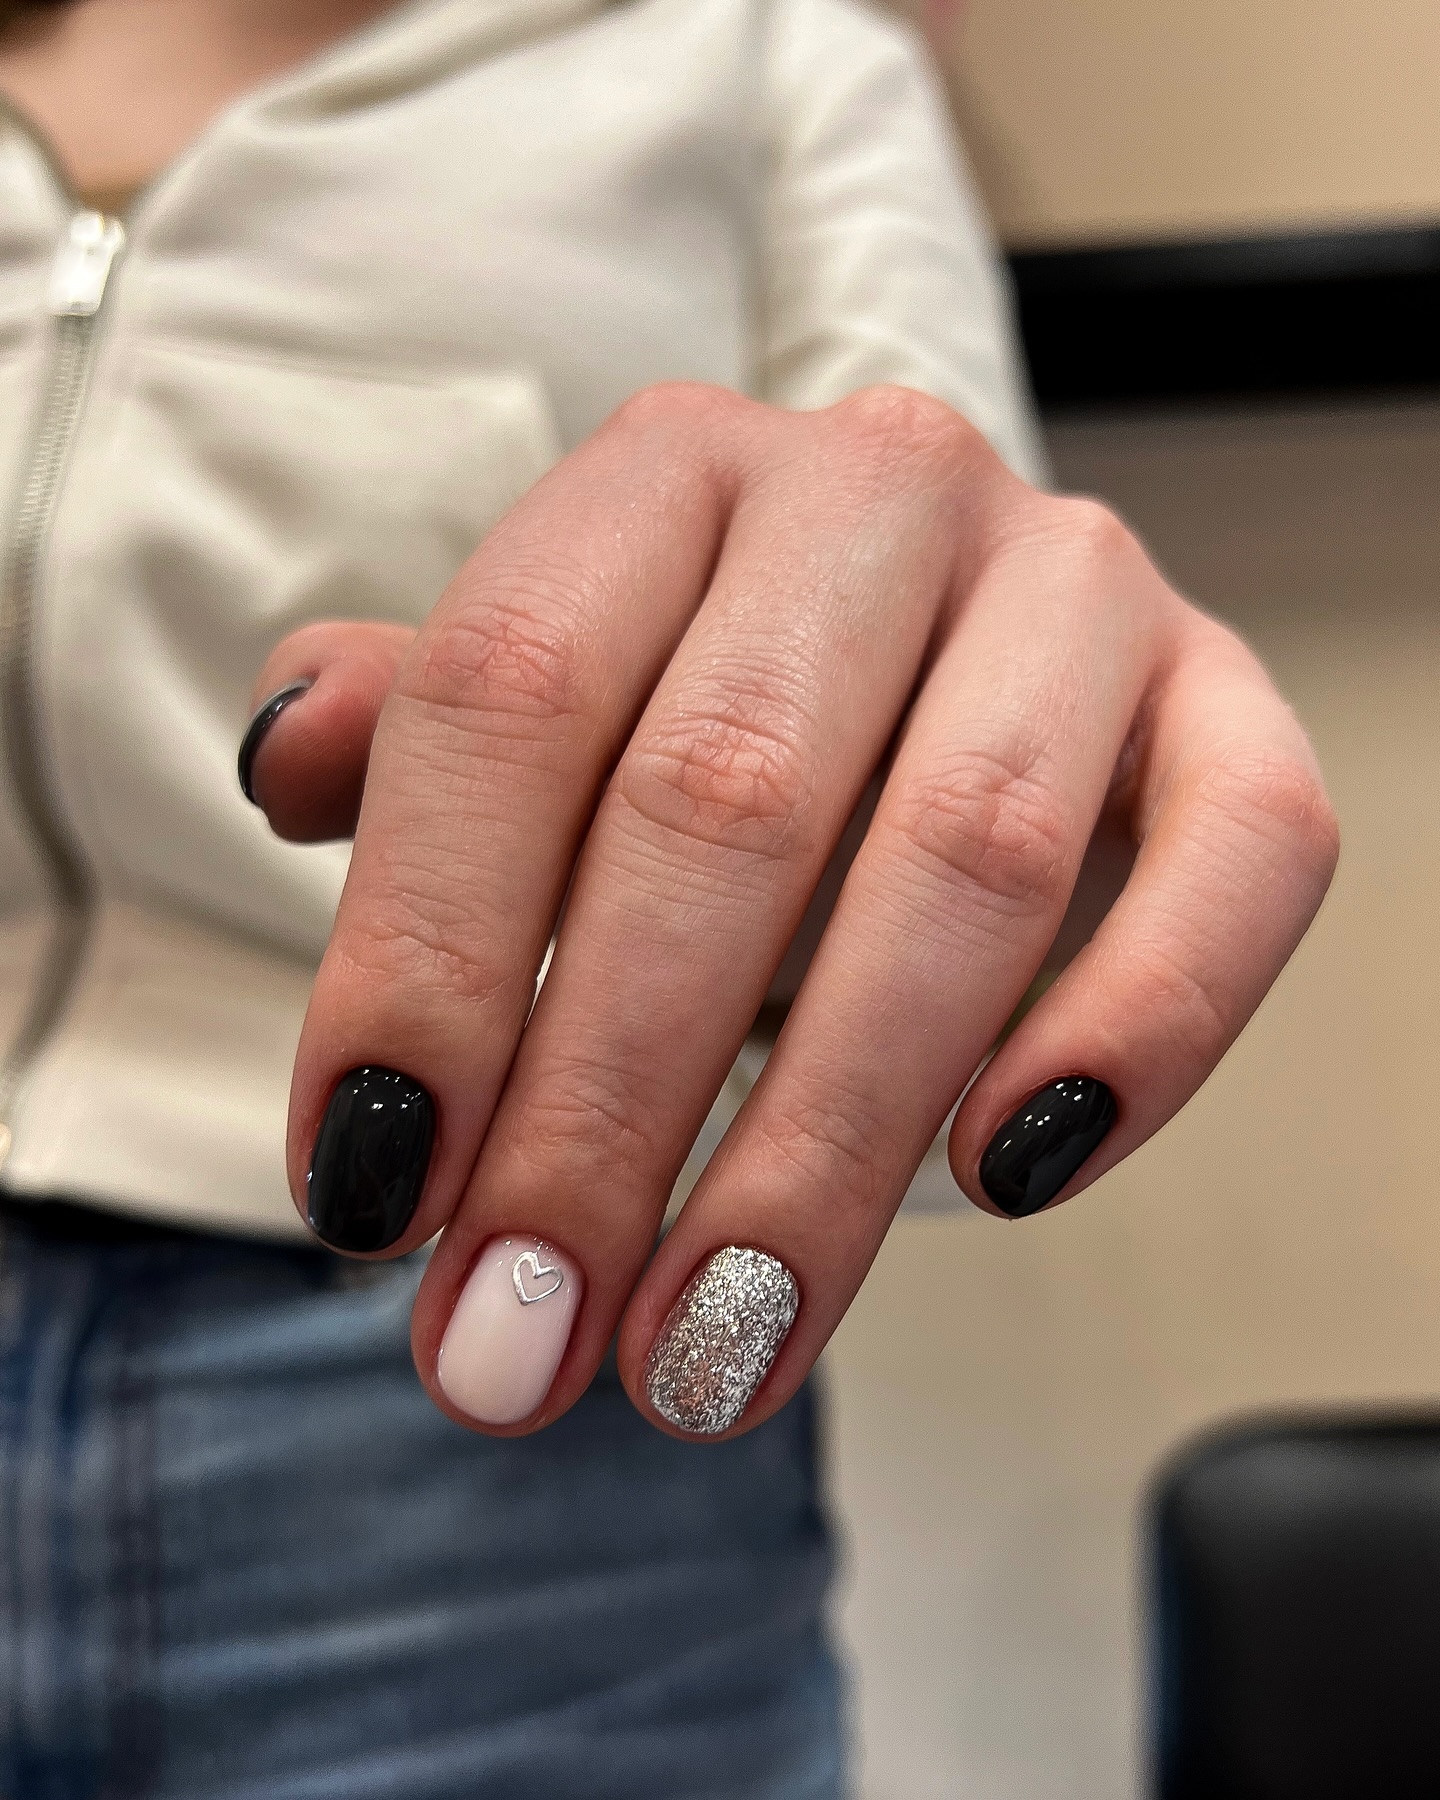 Chic Black and Silver Nail Design with Heart Detail